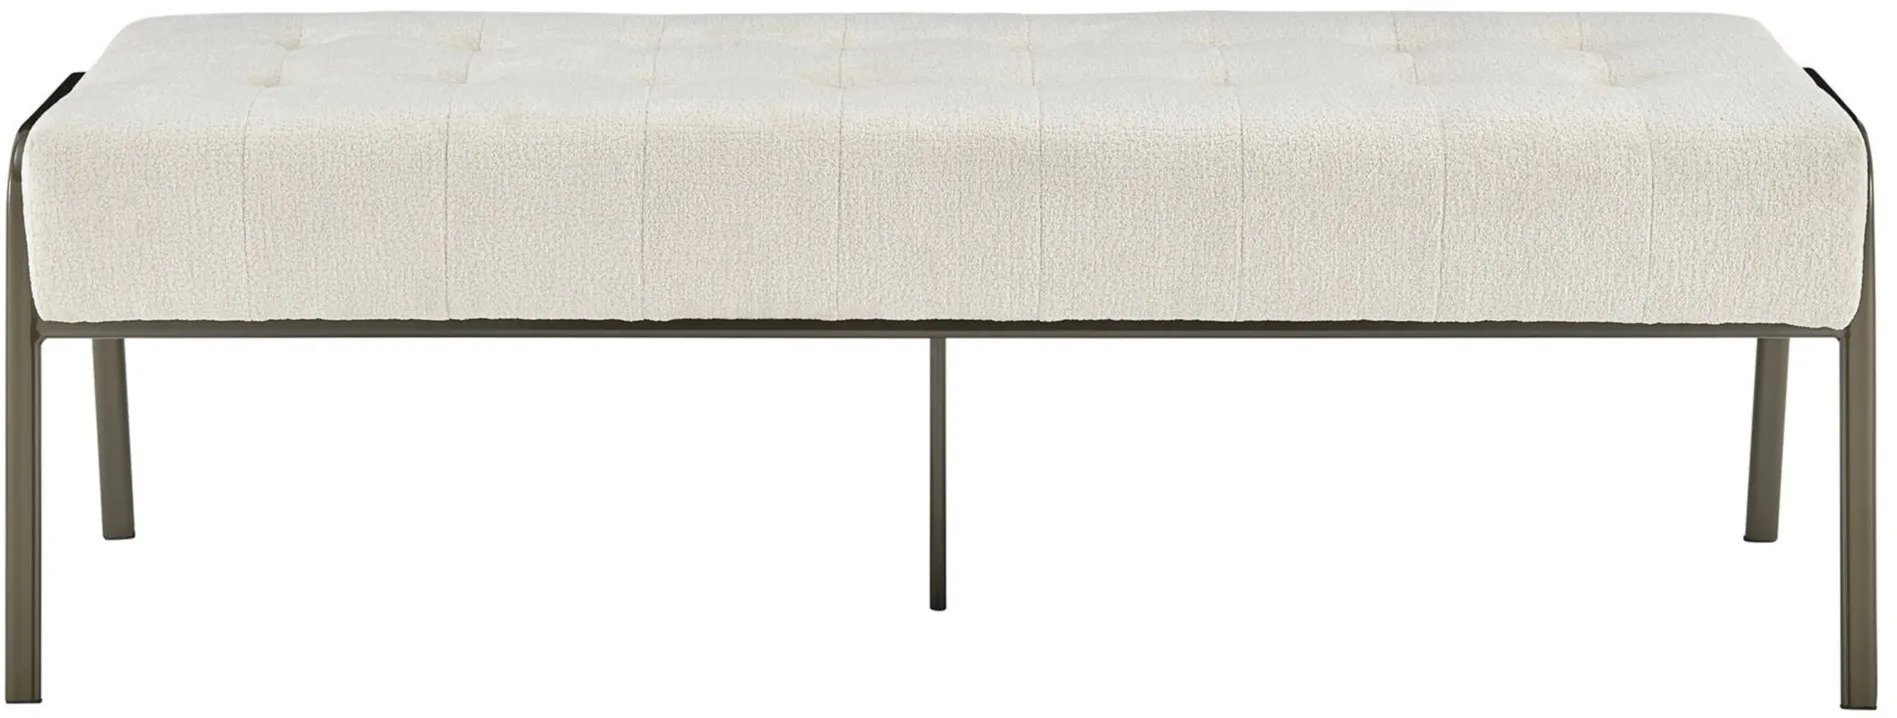 Venturi Fabric Tufted Bench in Opus Cream by New Pacific Direct